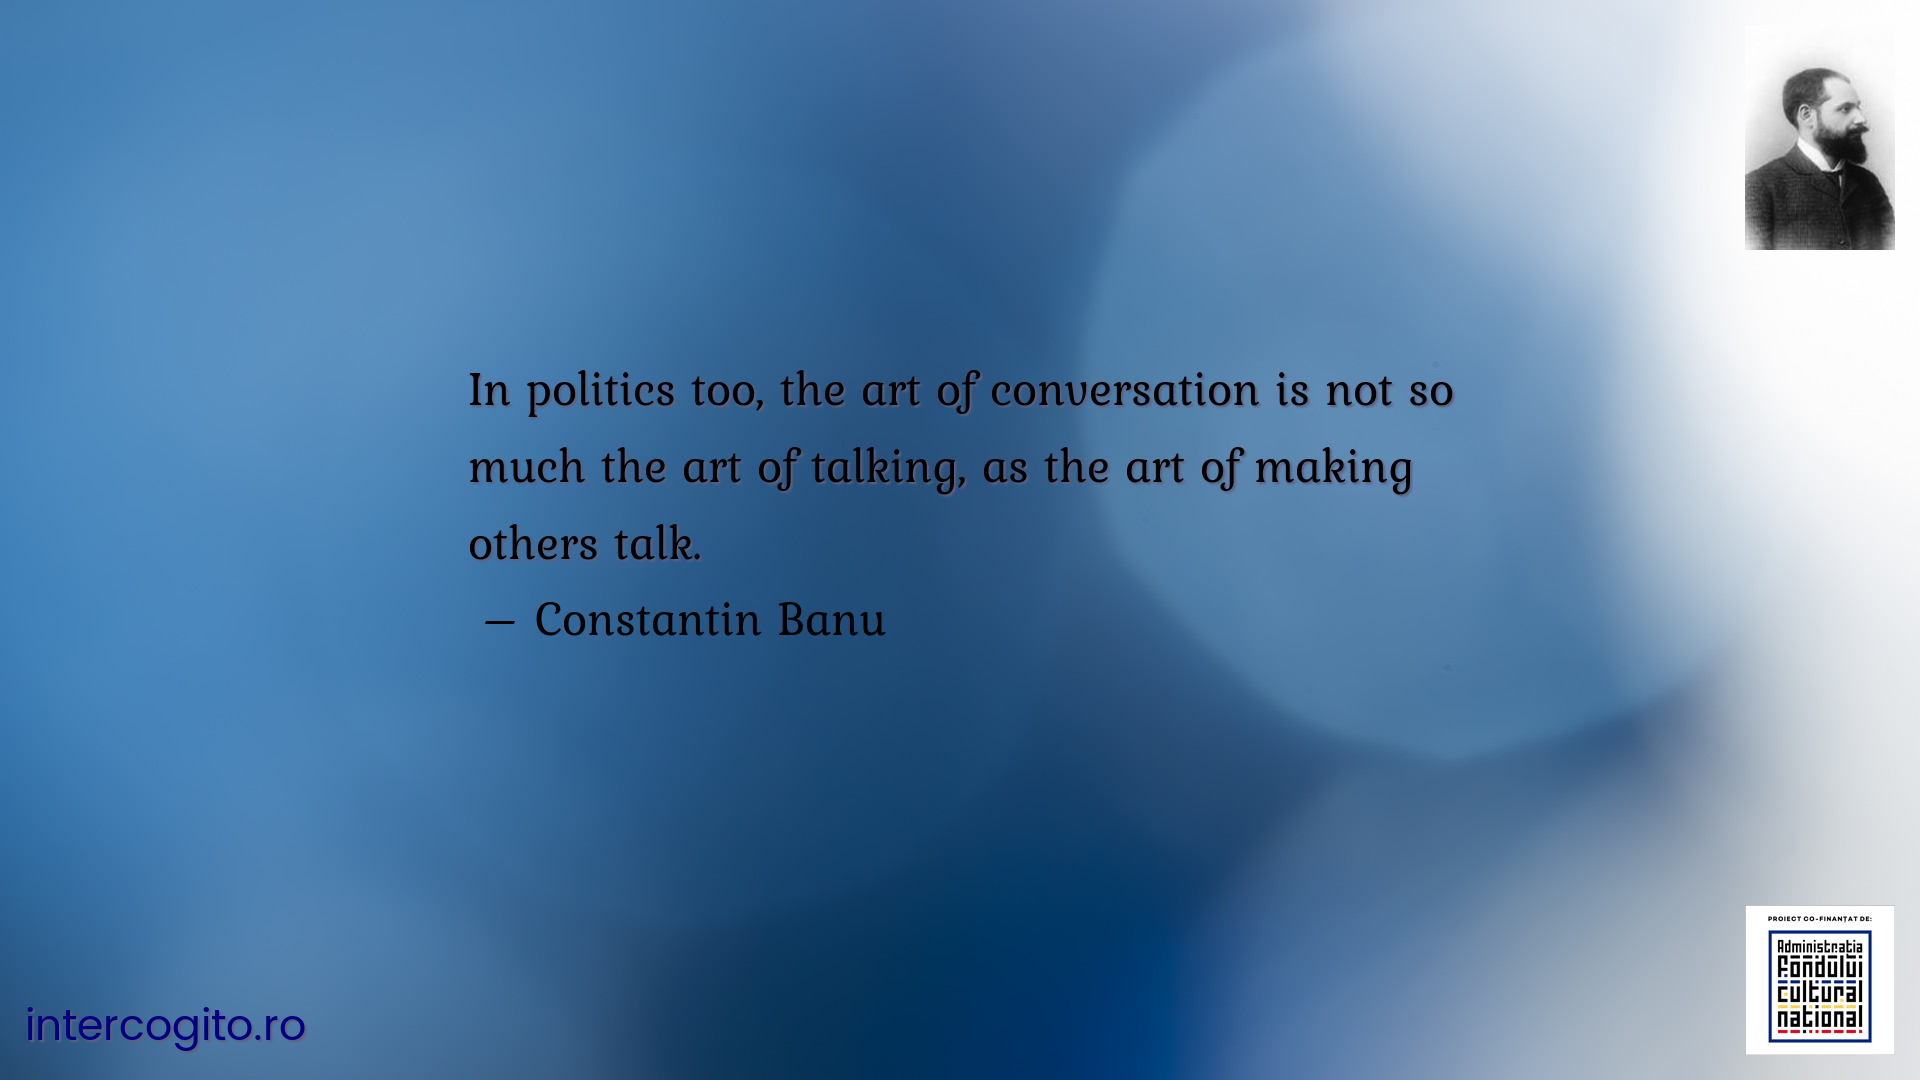 In politics too, the art of conversation is not so much the art of talking, as the art of making others talk.